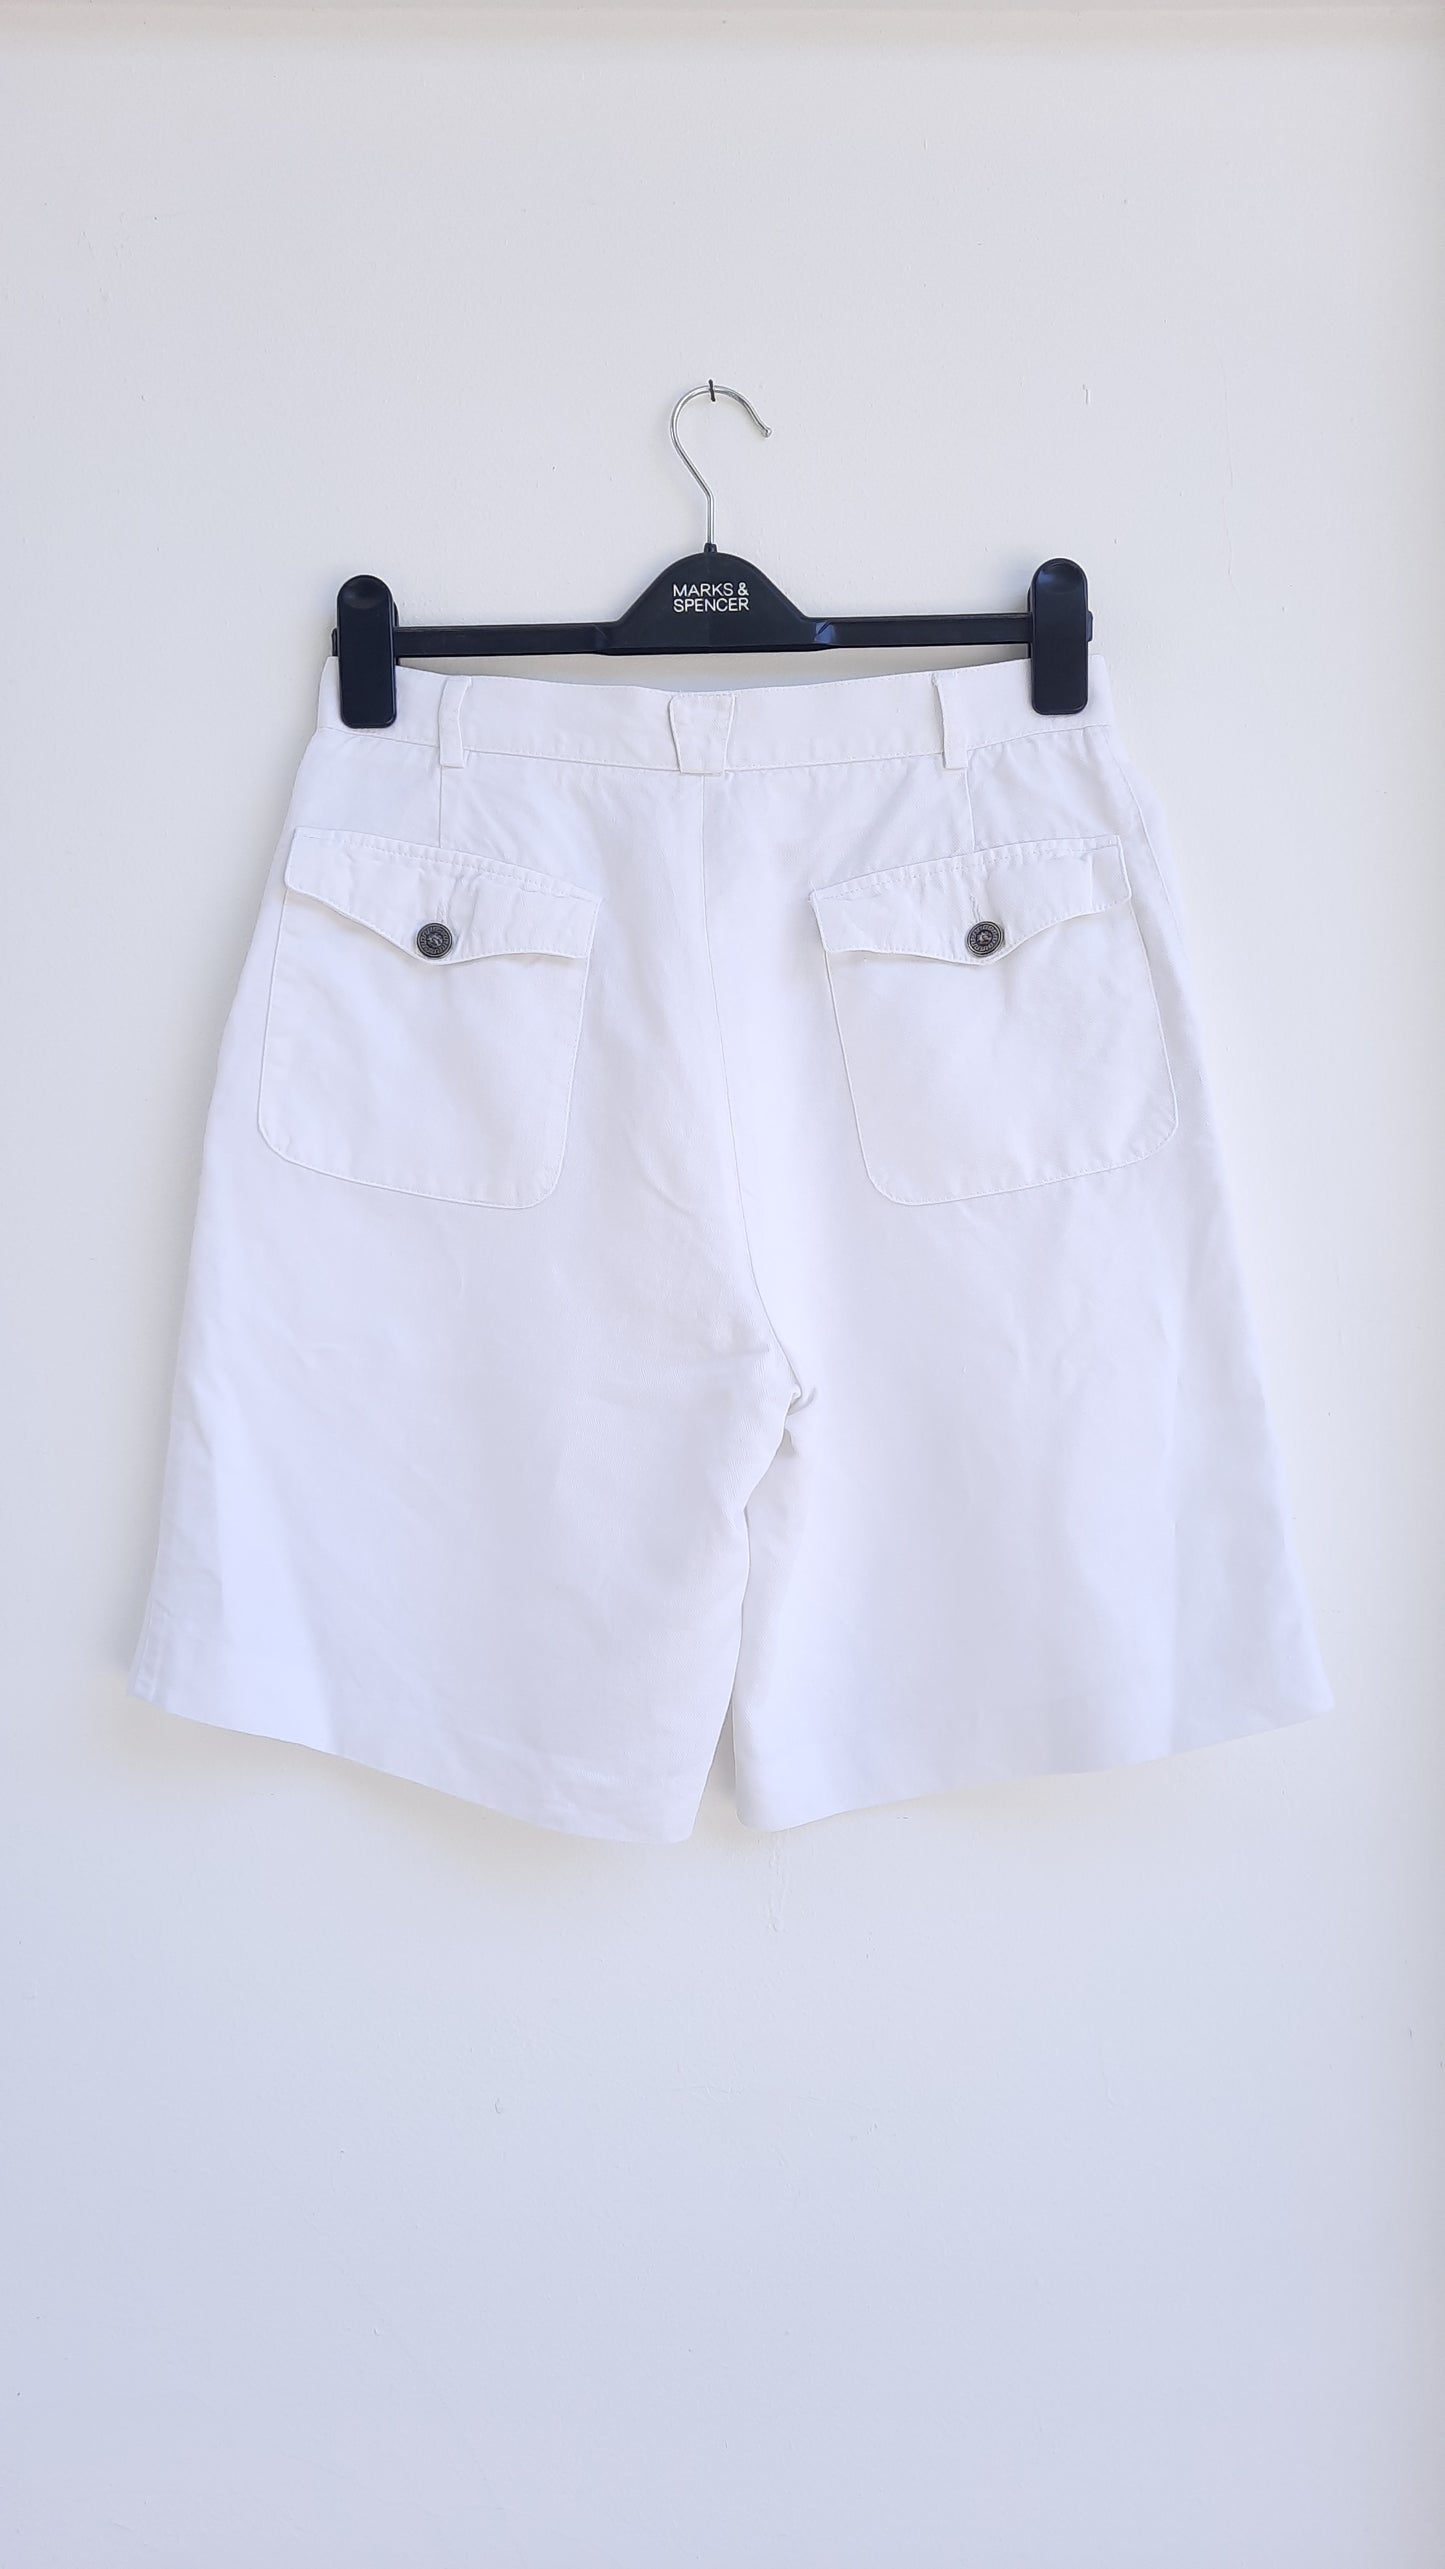 Vintage Versus by Gianni Versace Classic White Shorts